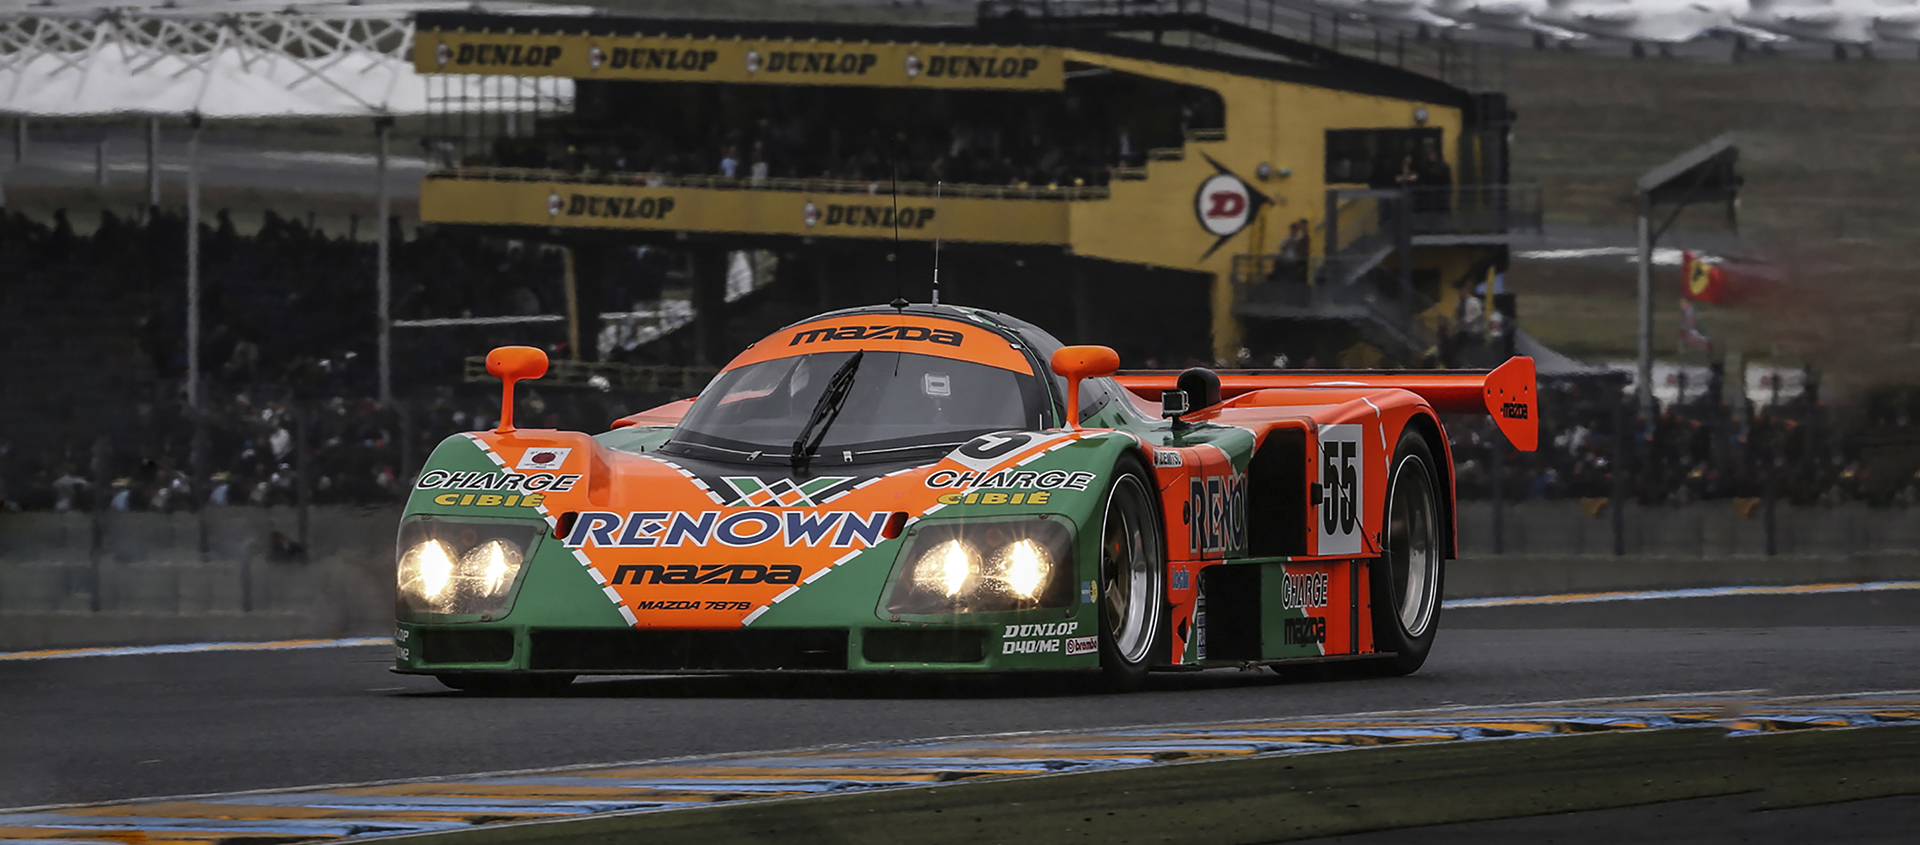 Forgotten Legends - When the rotary engine won at Le Mans